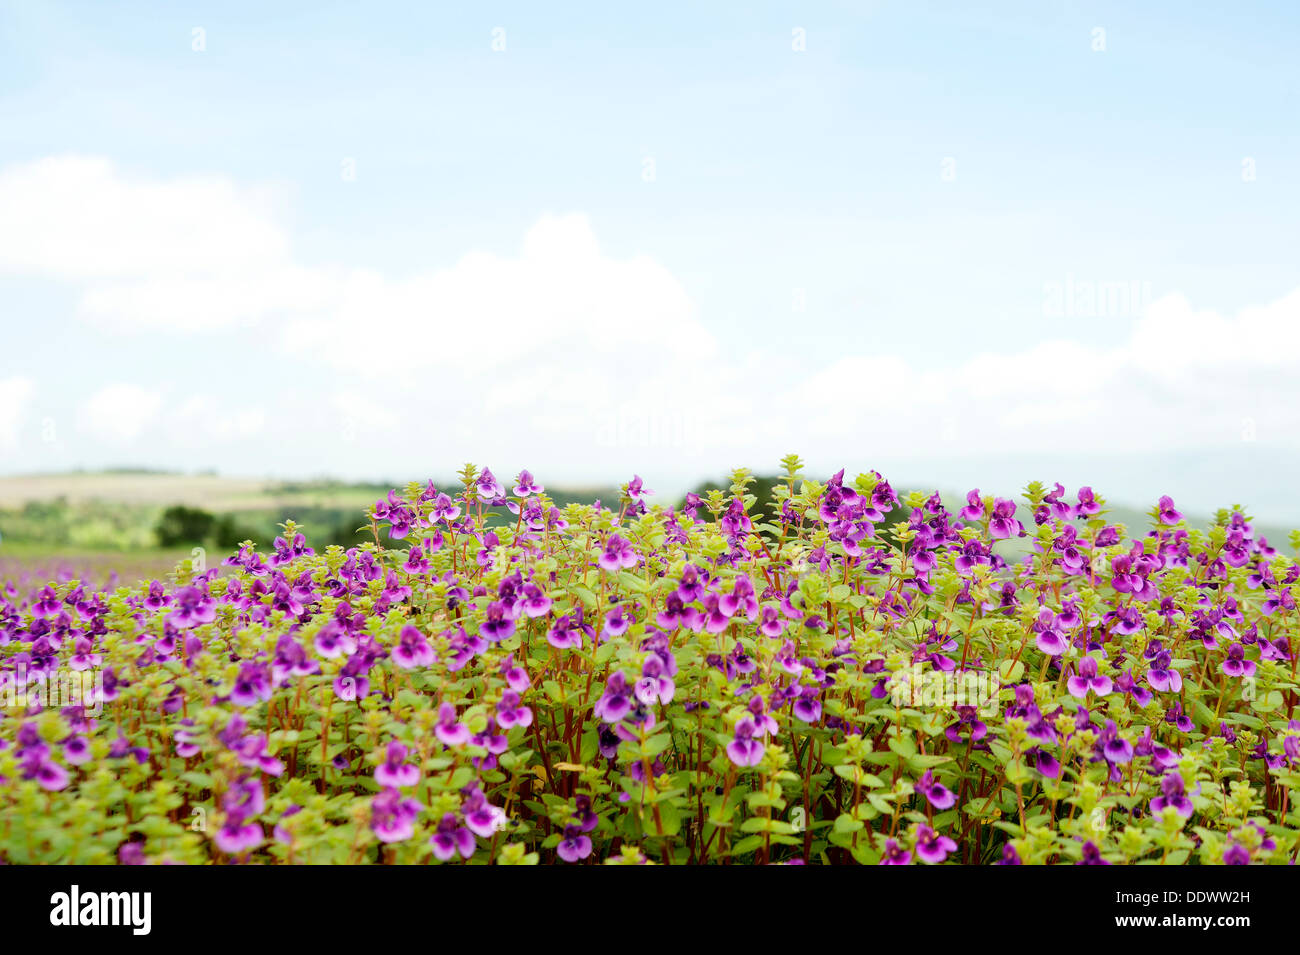 Bed of Flowers at Kass Plateau, UNESCO approved World Heritage Site Stock Photo